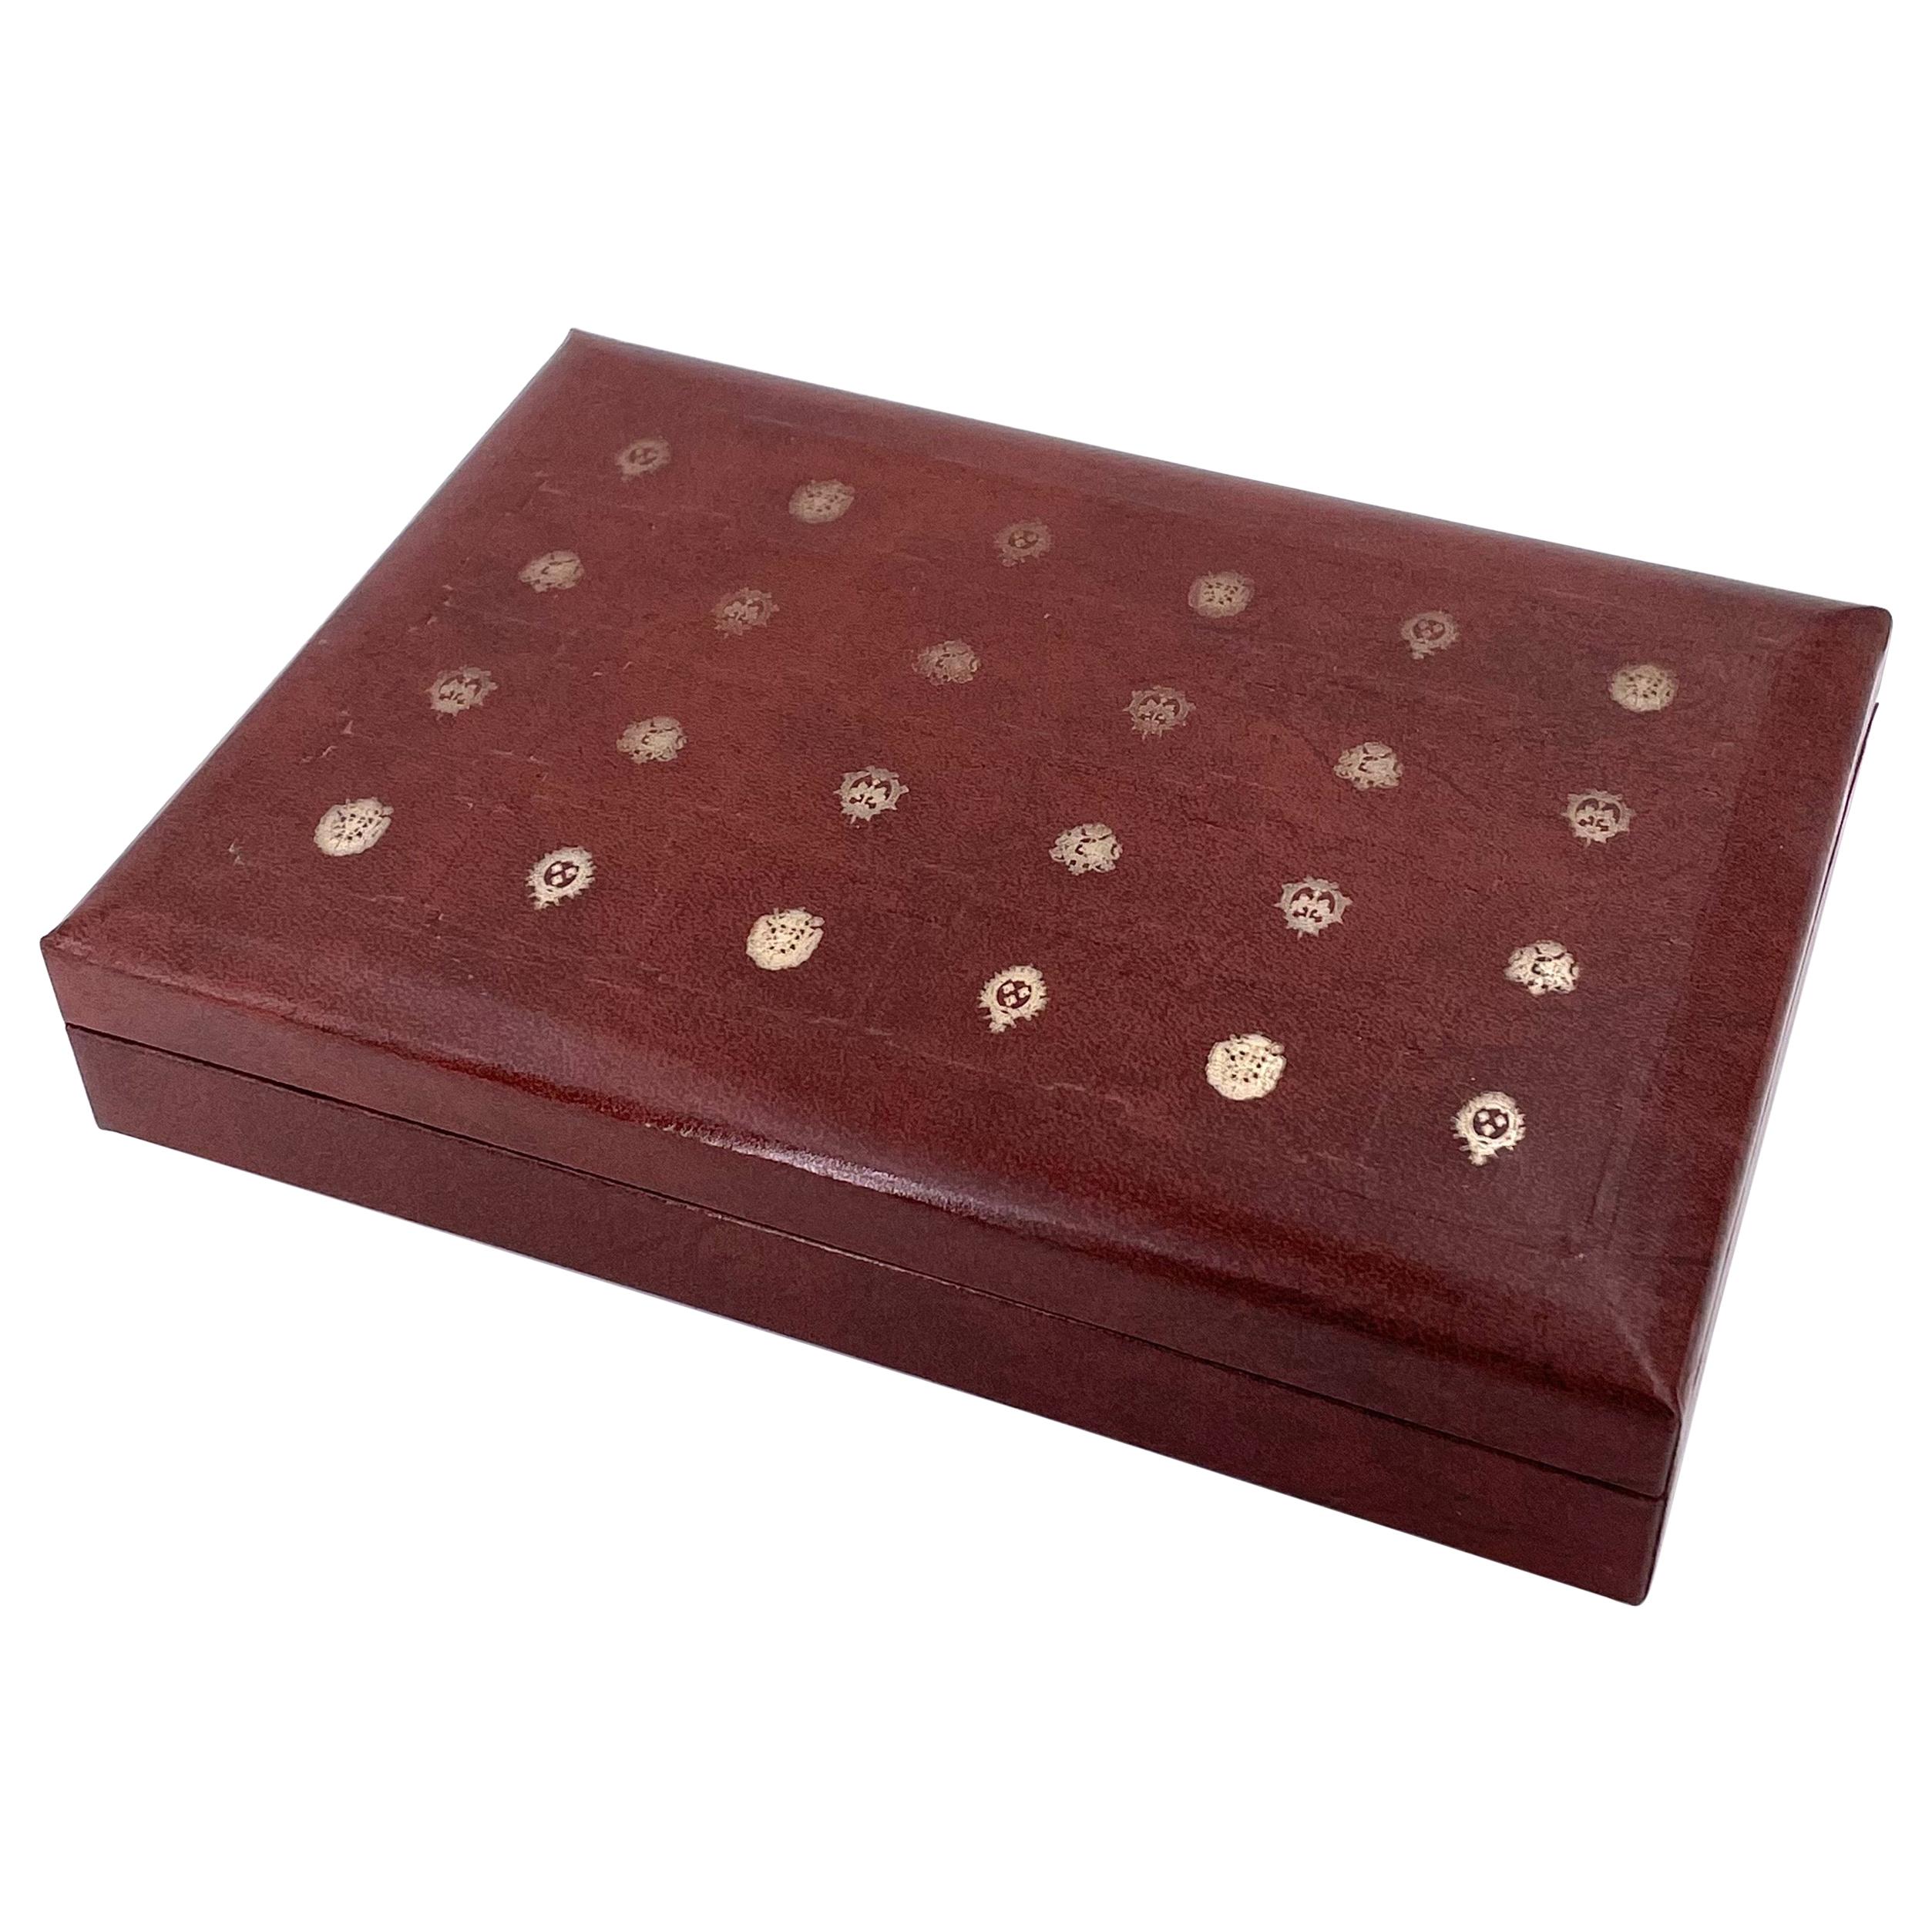 Embossed Leather Jewelry Box by Swank Made in Sweden Design by Philippe